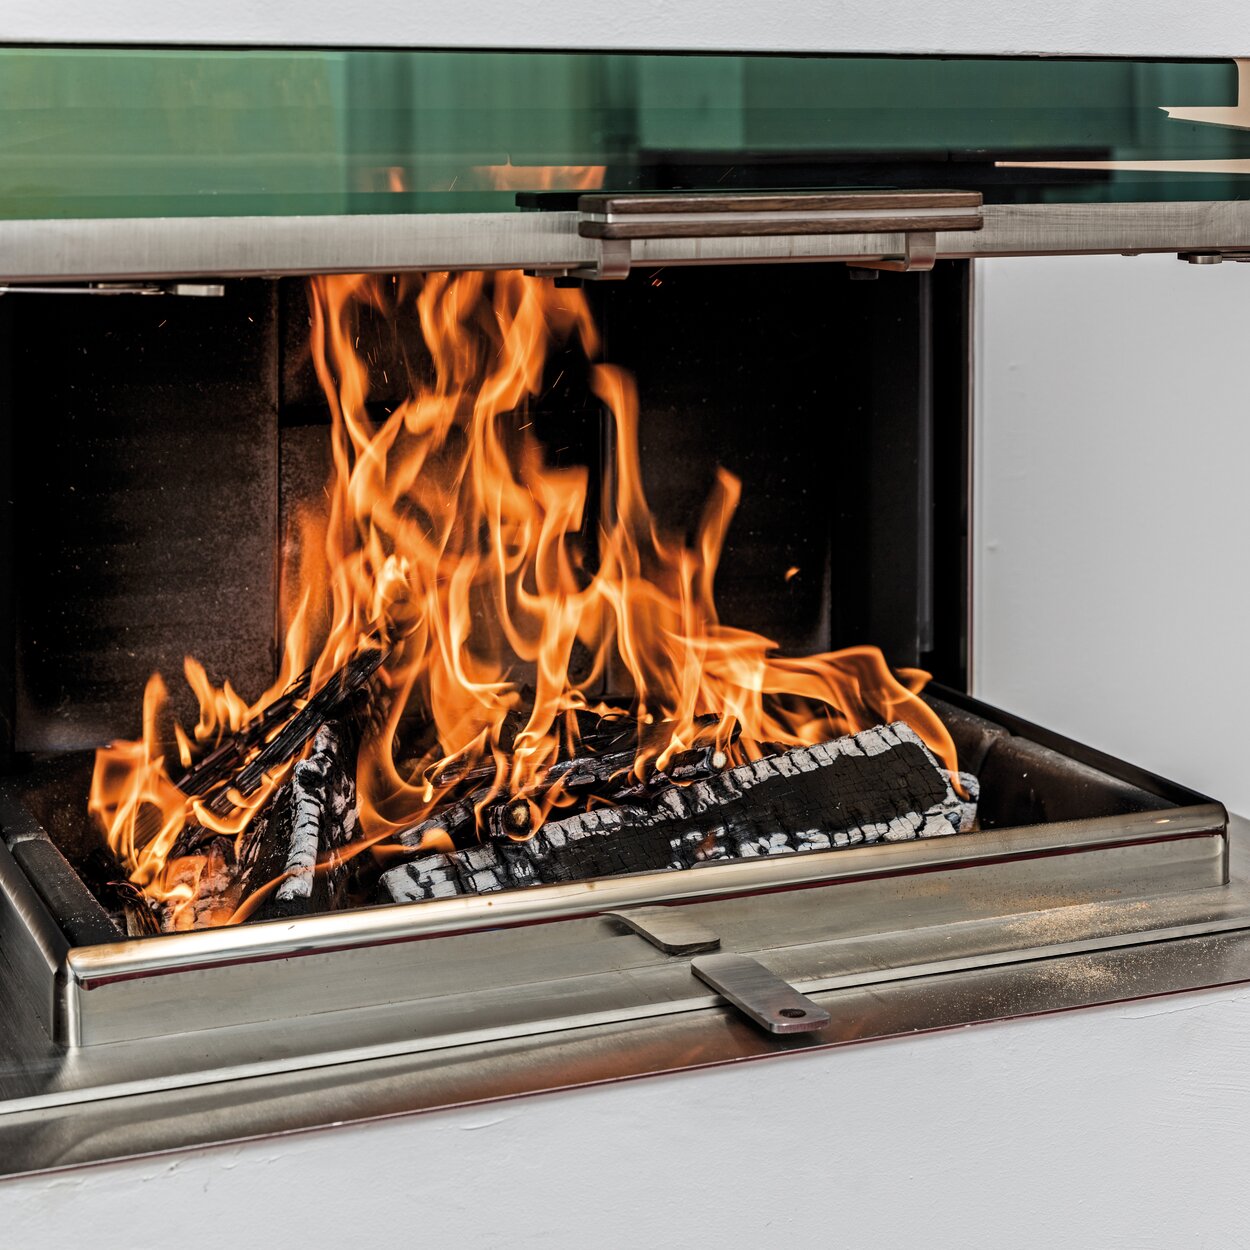 VISIO 3 ELEMENT with open firebox door, wood logs and air slide